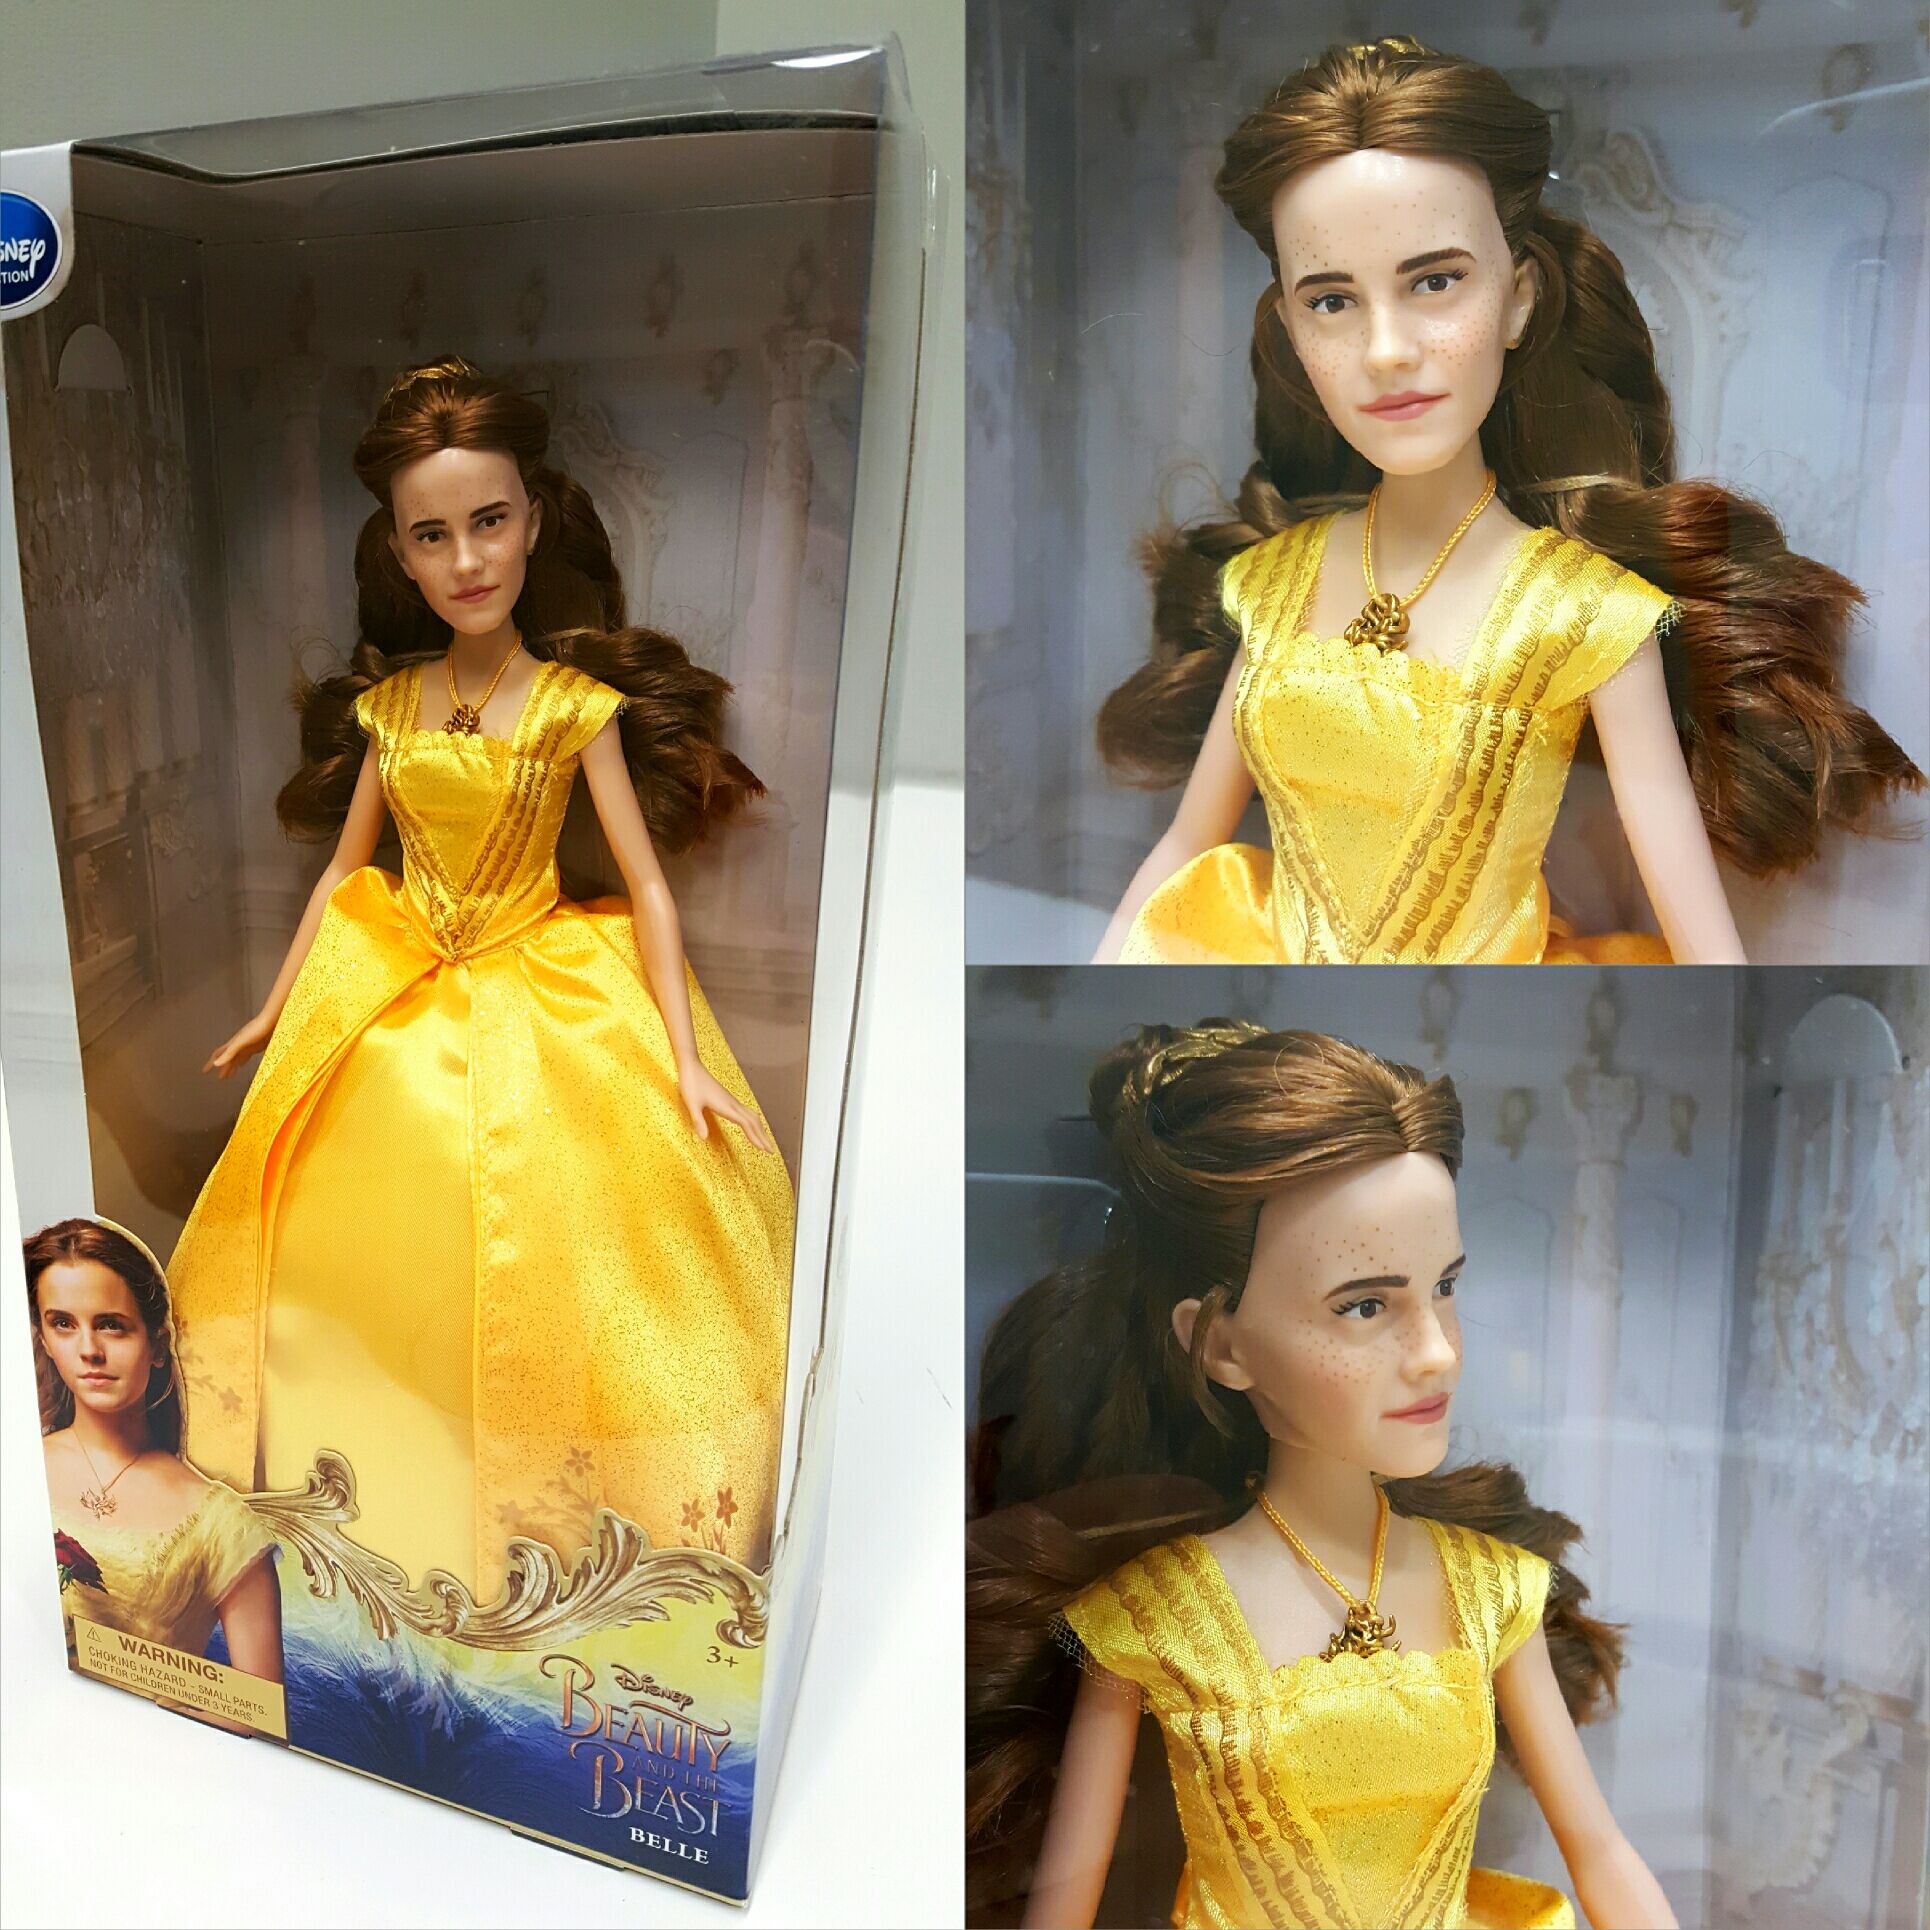 beauty and the beast stuffed toy